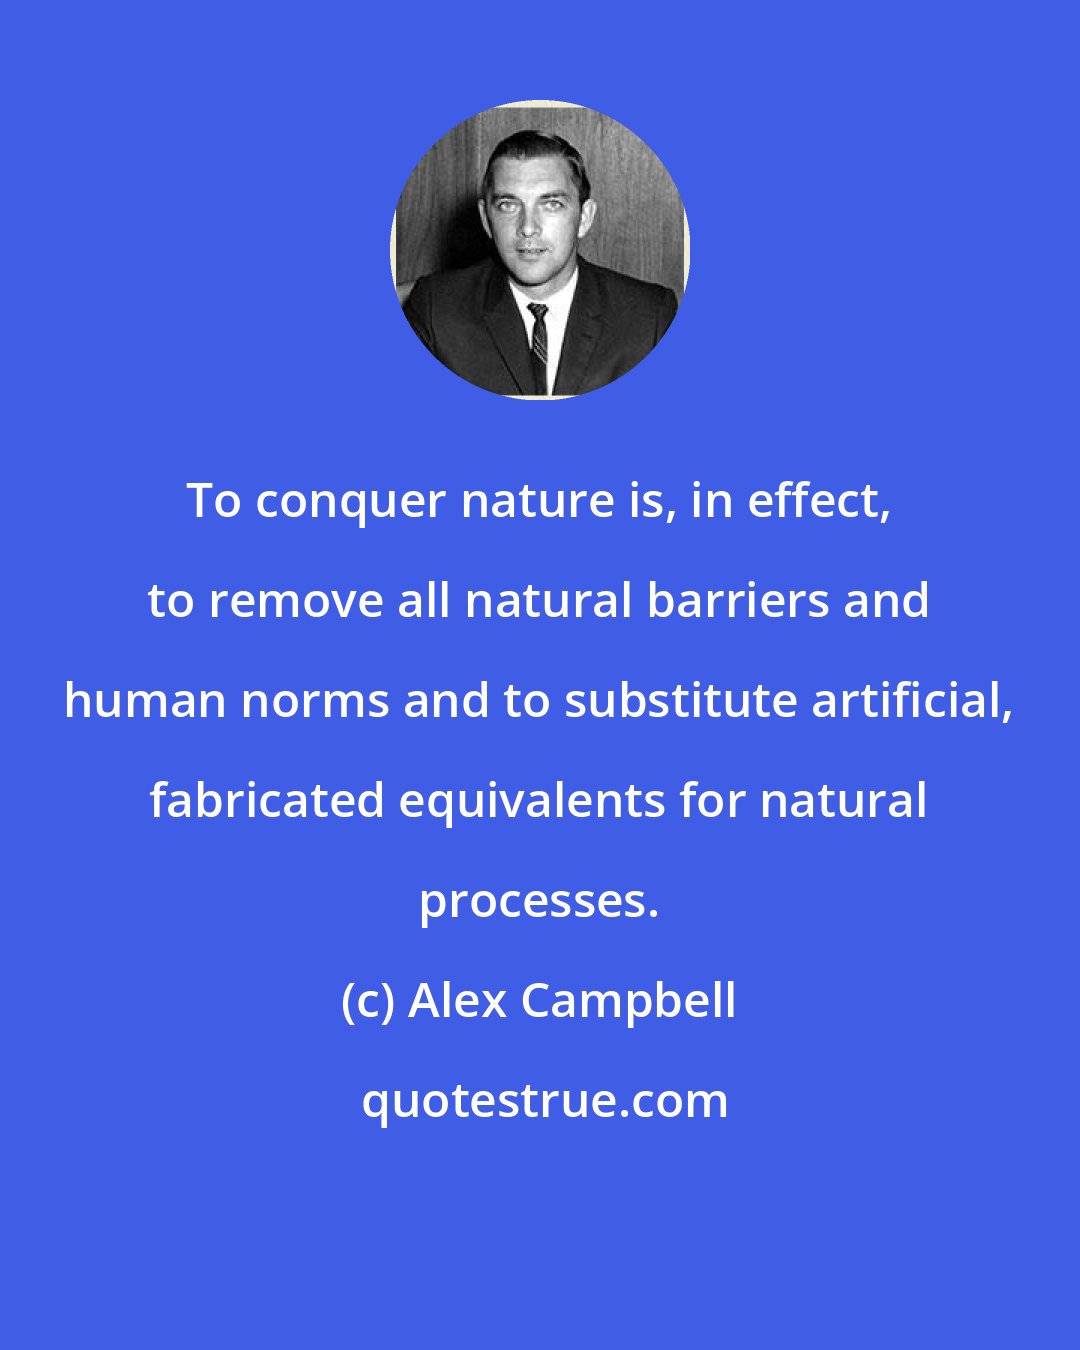 Alex Campbell: To conquer nature is, in effect, to remove all natural barriers and human norms and to substitute artificial, fabricated equivalents for natural processes.